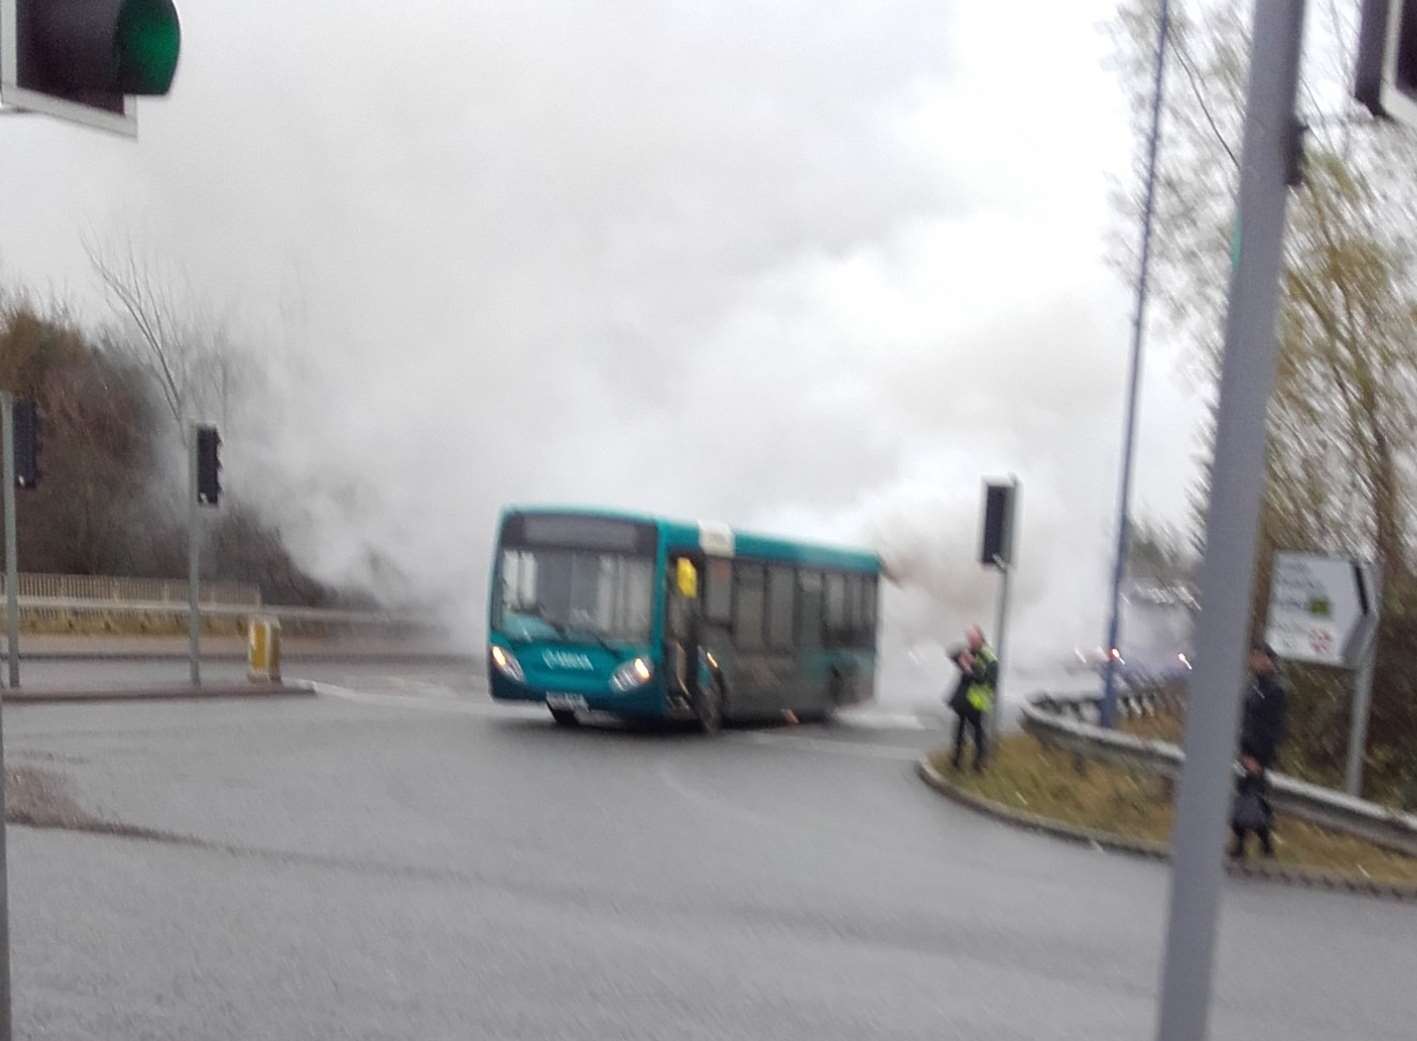 Brian Ropely was forced to get off a bus after smoke began to appear.